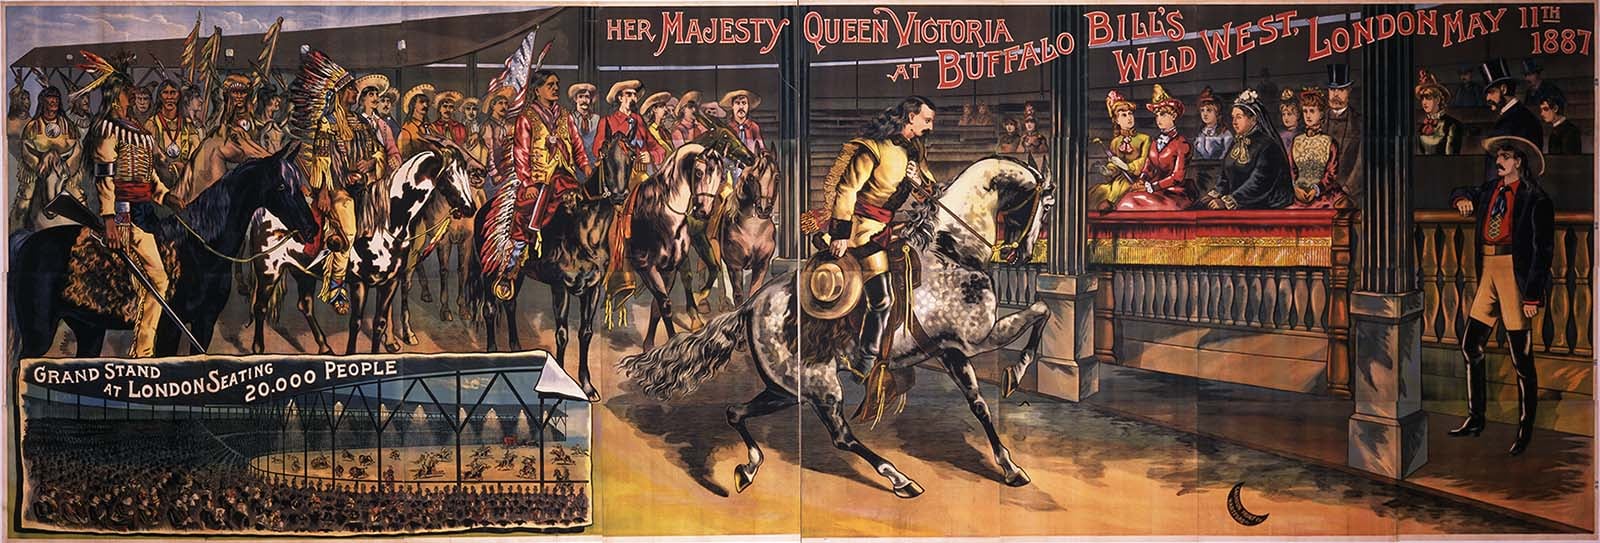 Fig. 1: Wild West show poster commemorating Buffalo Bill's performance before England's Queen Victoria on May 11, 1887. Mary Jester Allen Acquisition fund purchase. 1.69.6354.